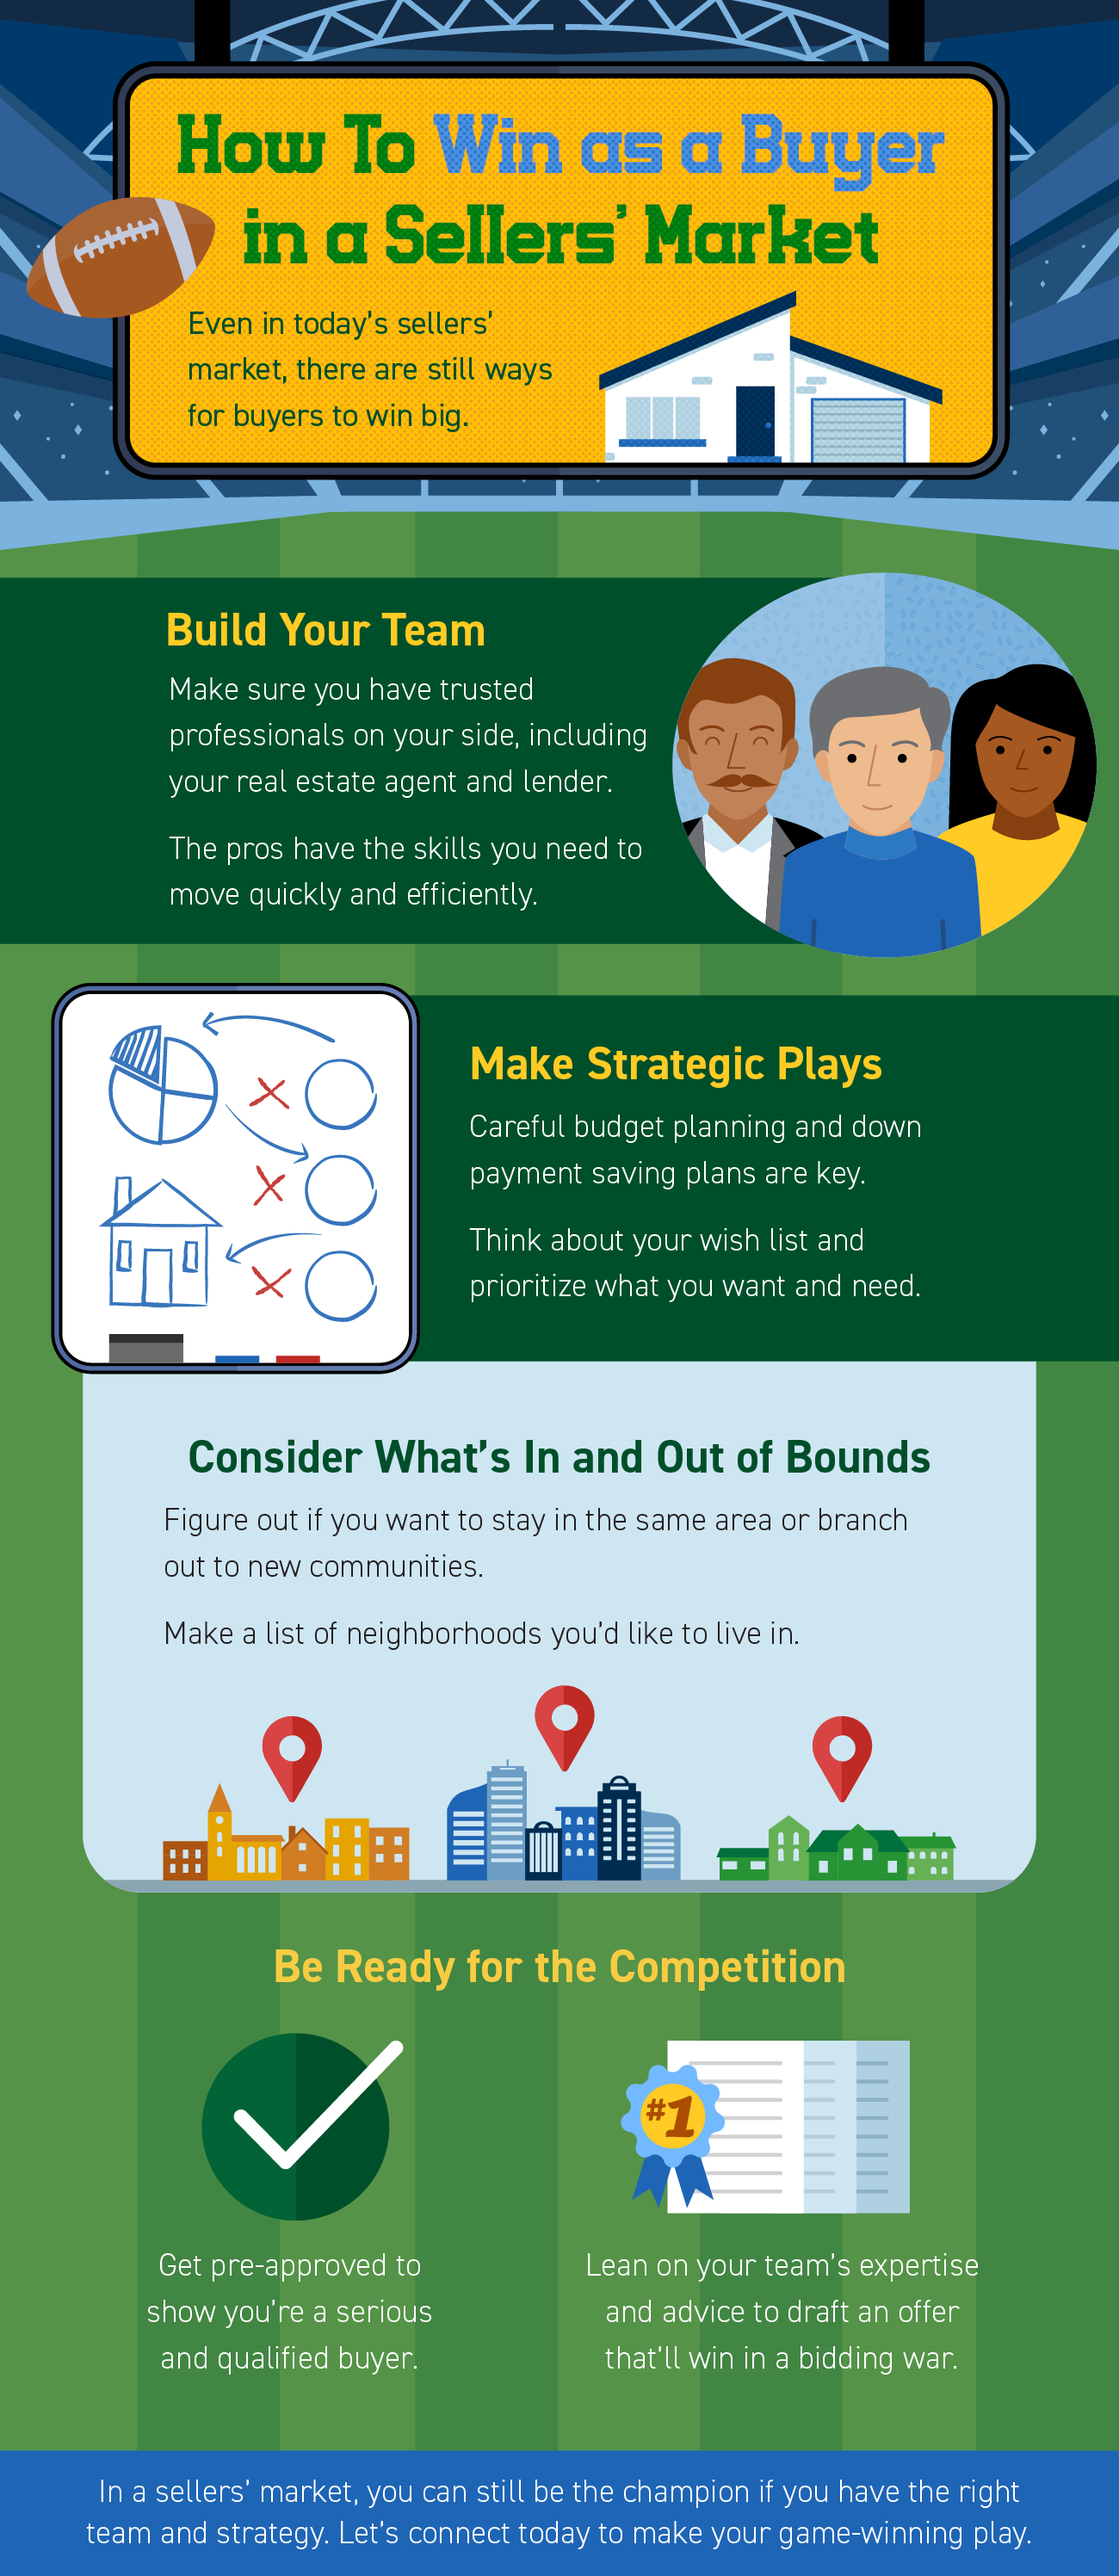 How To Win as a Buyer in a Sellers’ Market [INFOGRAPHIC] | Simplifying The Market